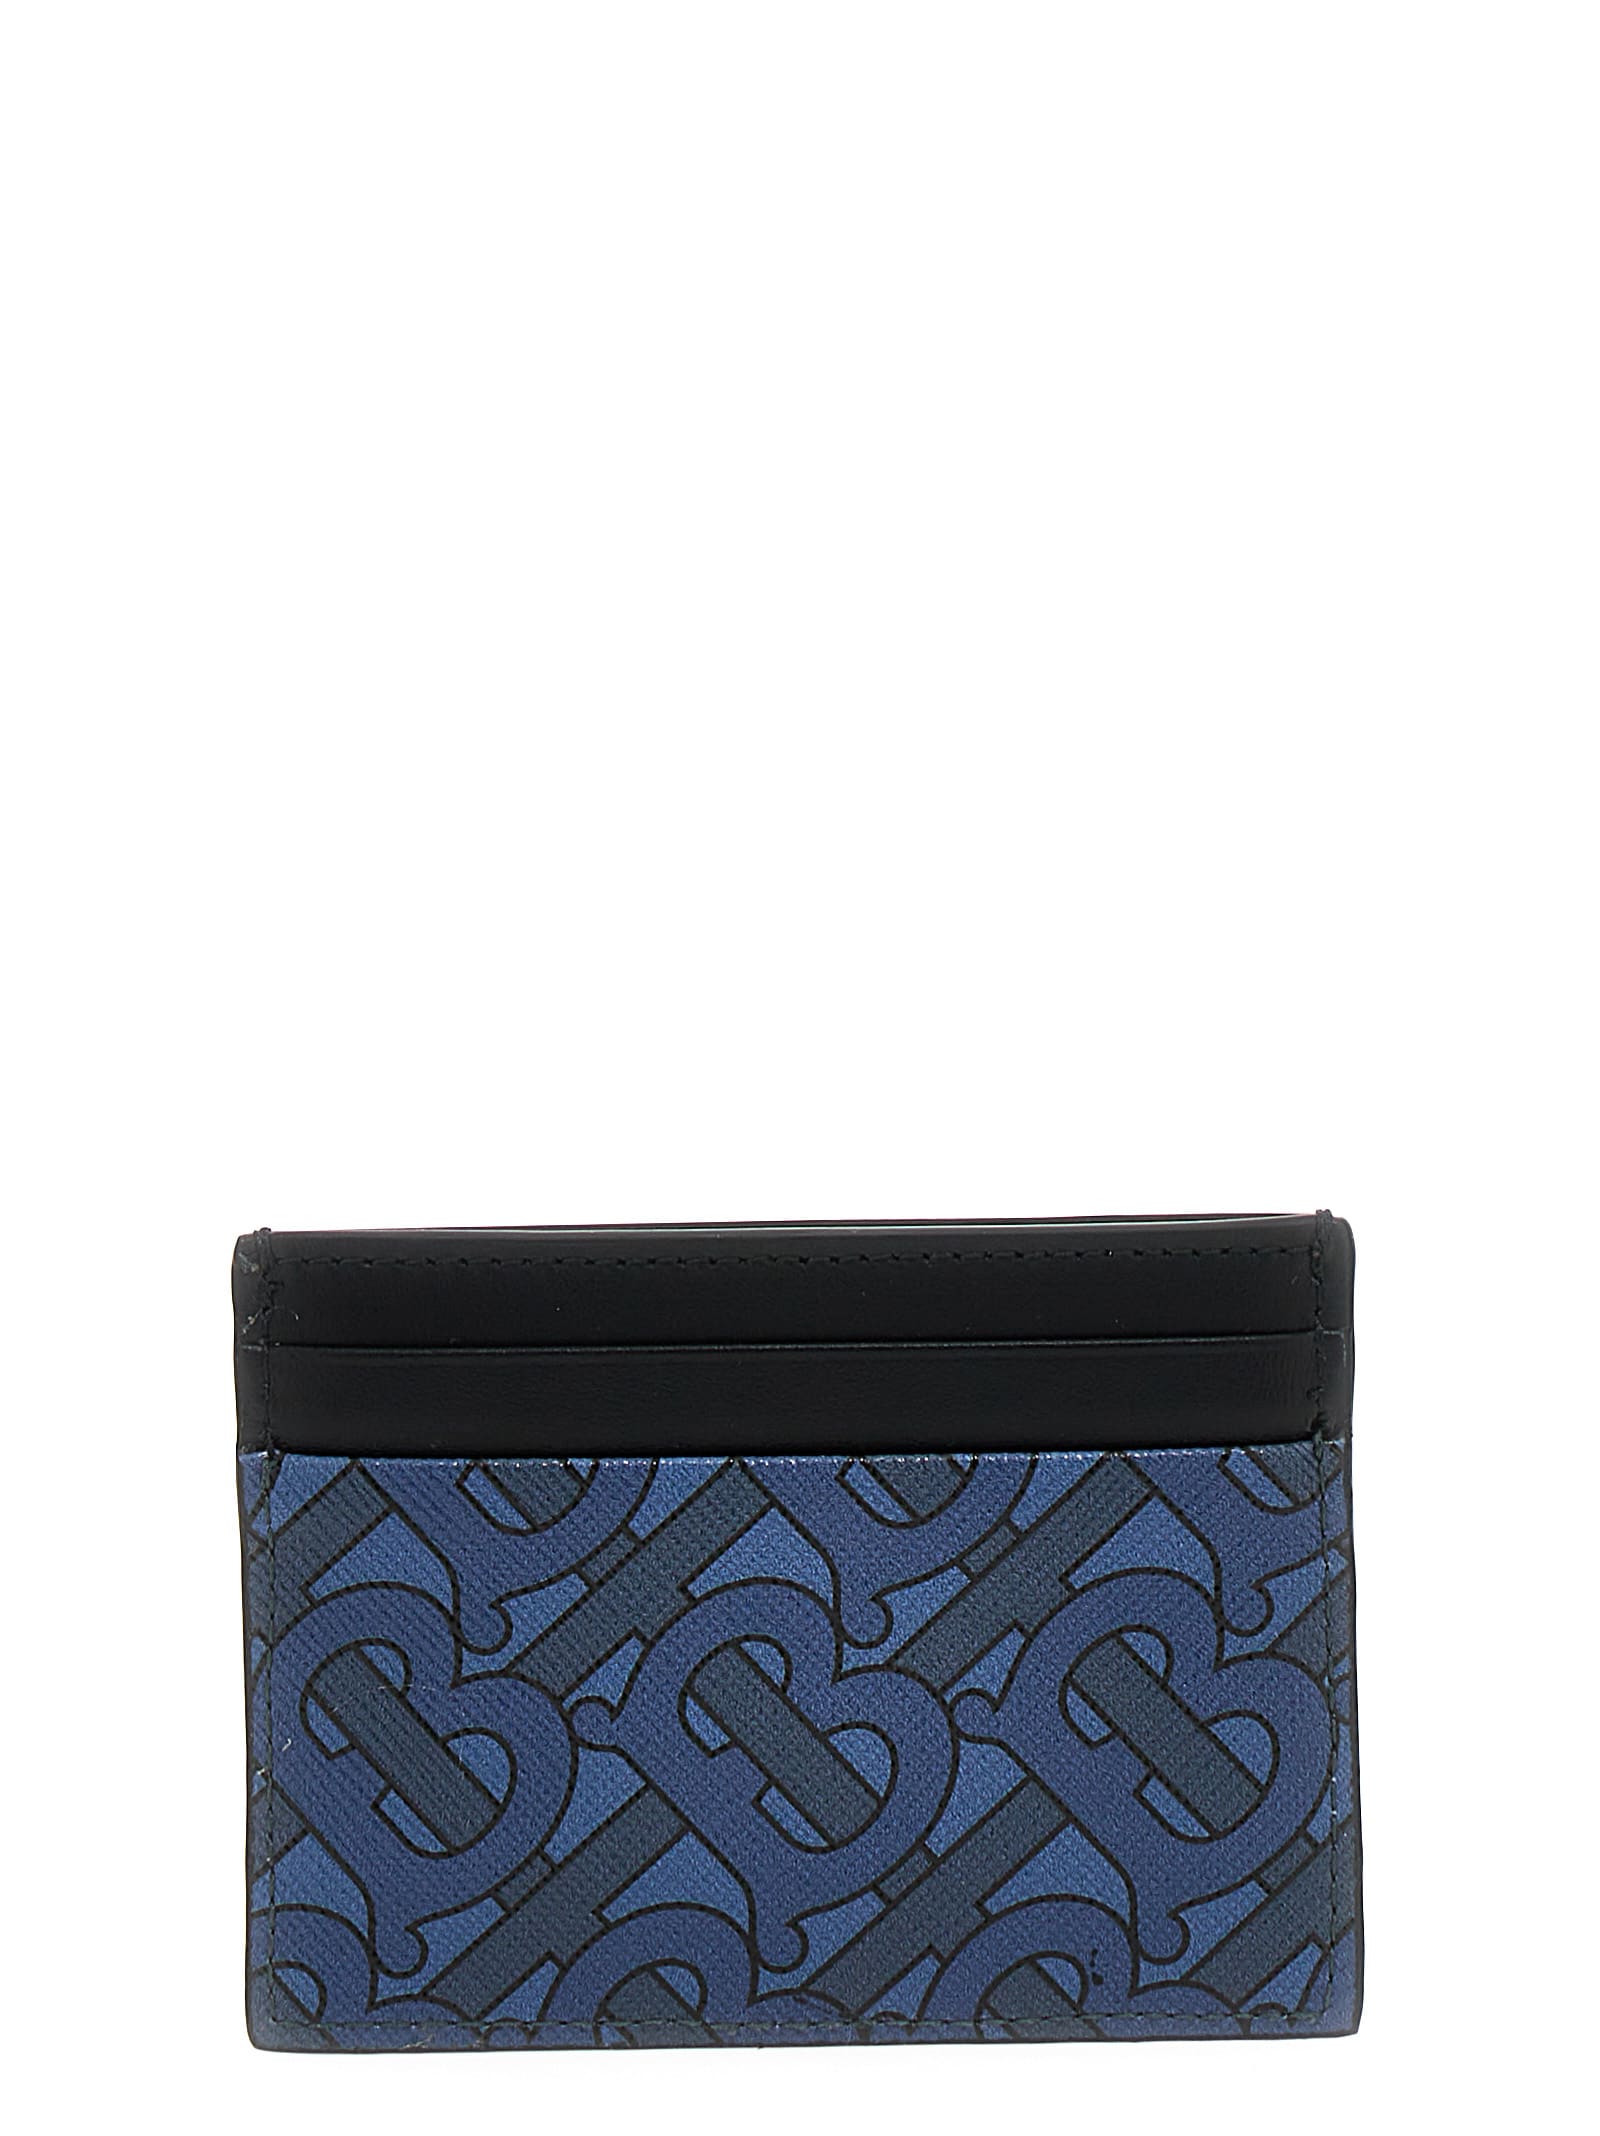 Burberry Sandon Canvas & Leather Wallet In Blue